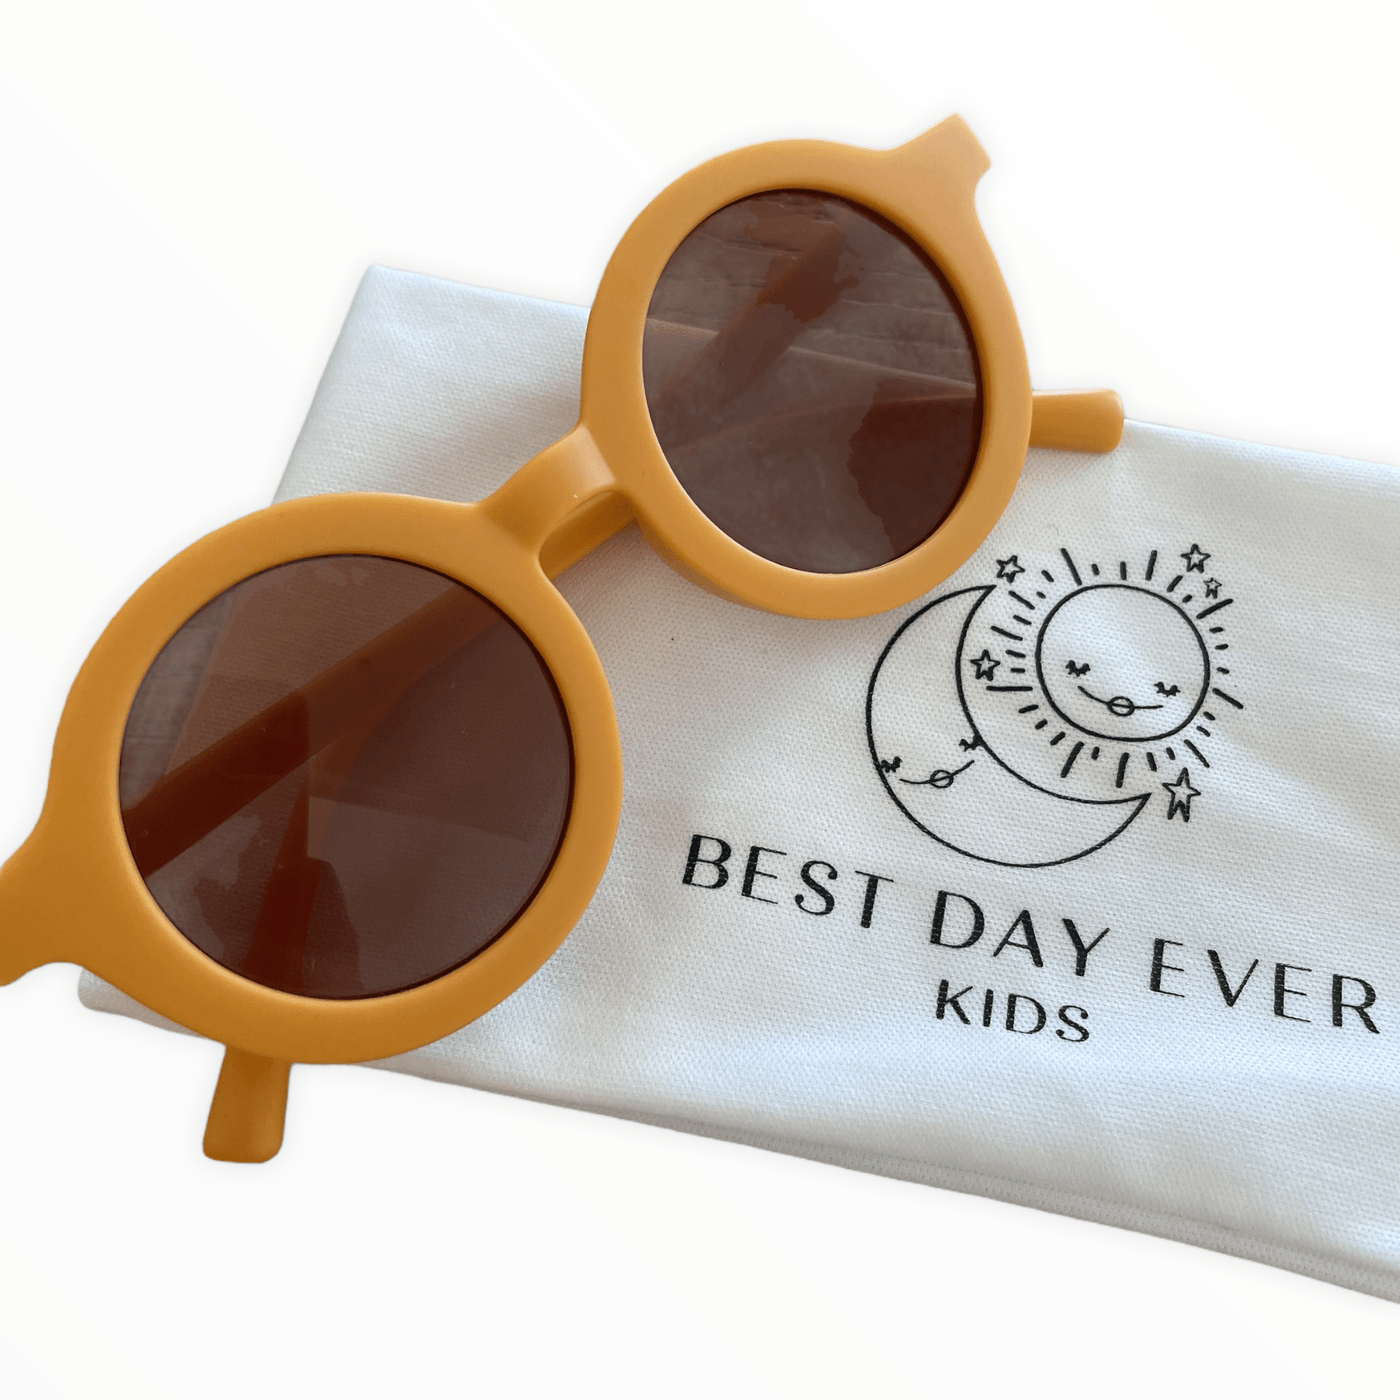 Best Day Ever Kids Sunglasses Signature Sunny - Linen buy online boutique kids clothing